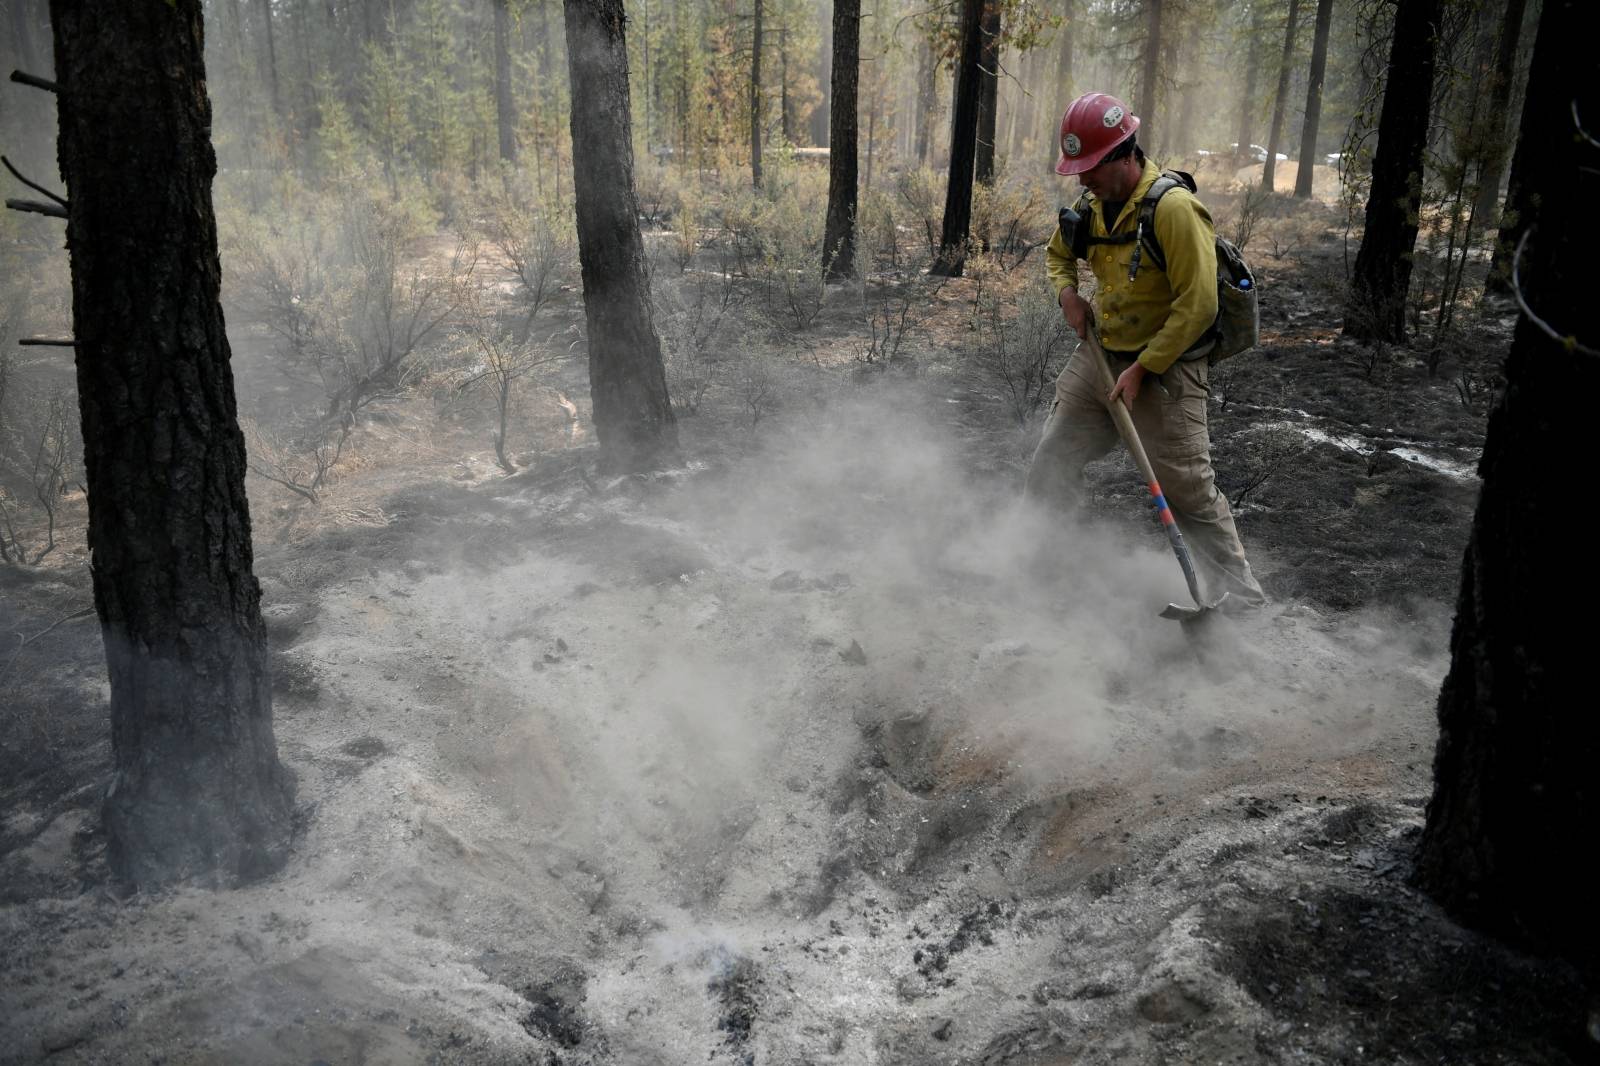 Firefighters deal with extreme conditions as the Bootleg Fire in Oregon expands to over 200,00 acres.